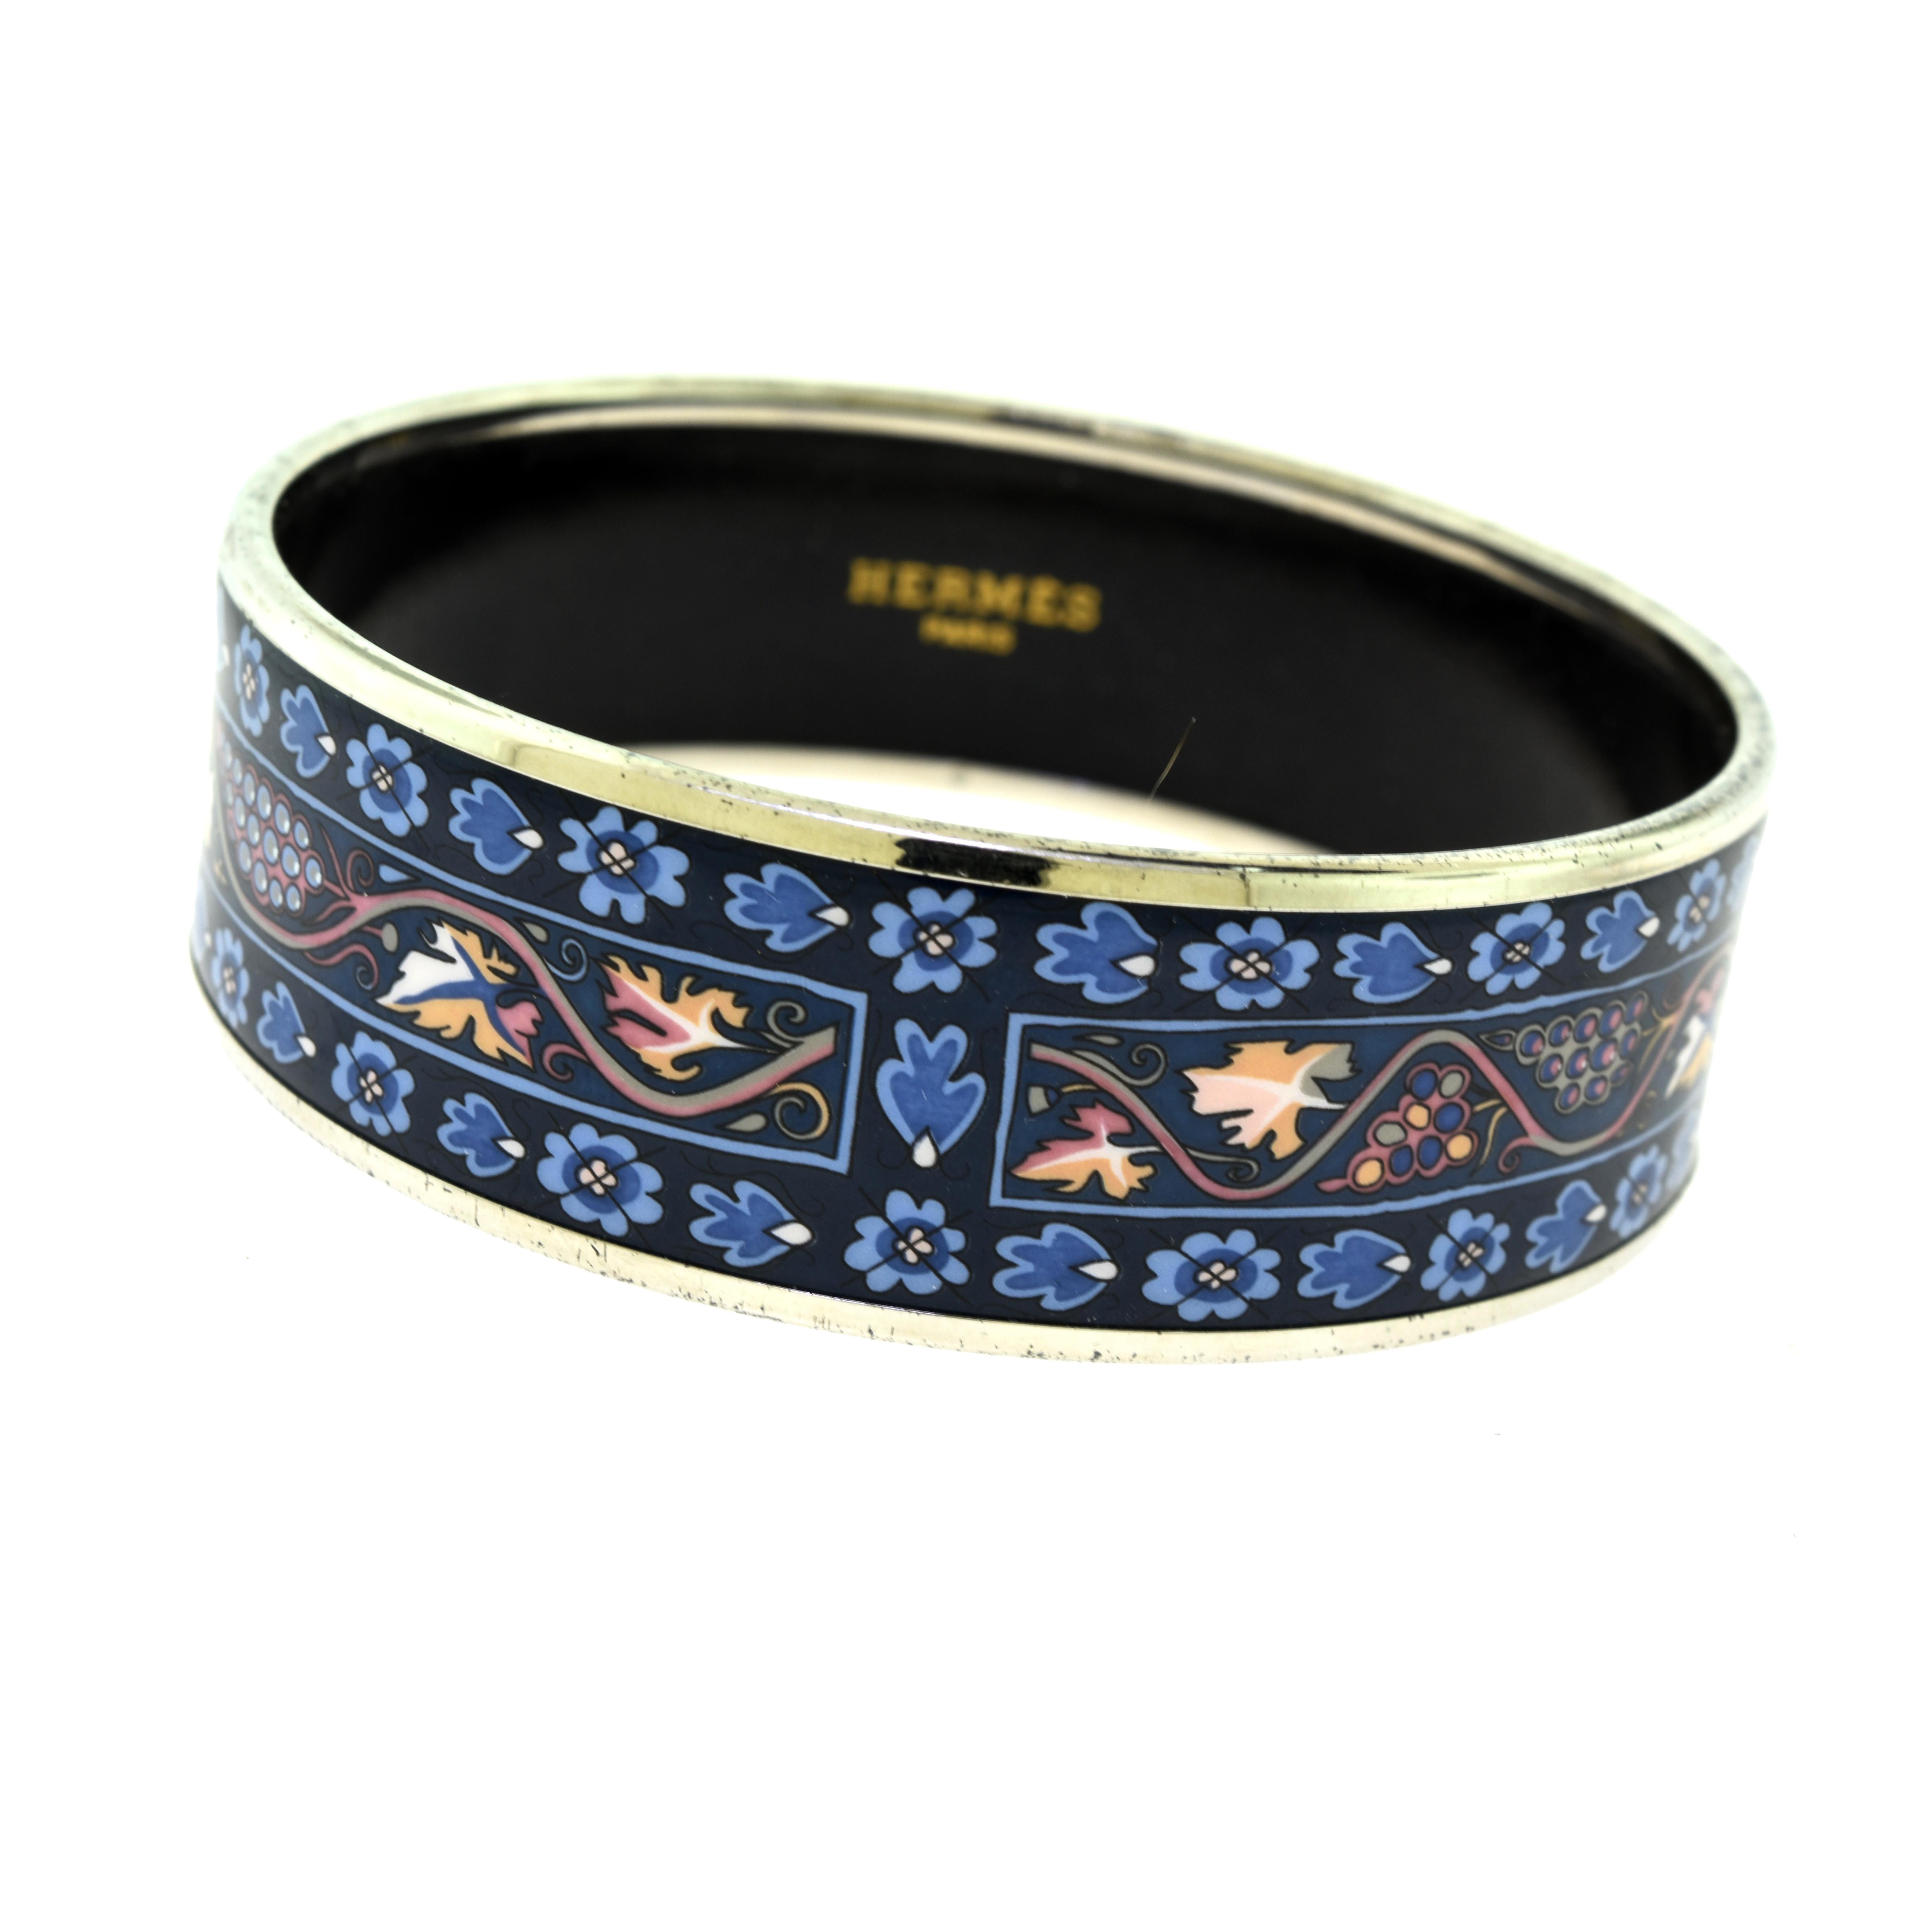 Brilliance Jewels, Miami
Questions? Call Us Anytime!
786,482,8100

Designer: Hermes

Style: Patterned Bangle

Material: Palladium plated

Non-Metal Material: Printed Color Enamel

Circumference: (greater than) < 7.5 inches

Hallmarks: Hermes Paris,